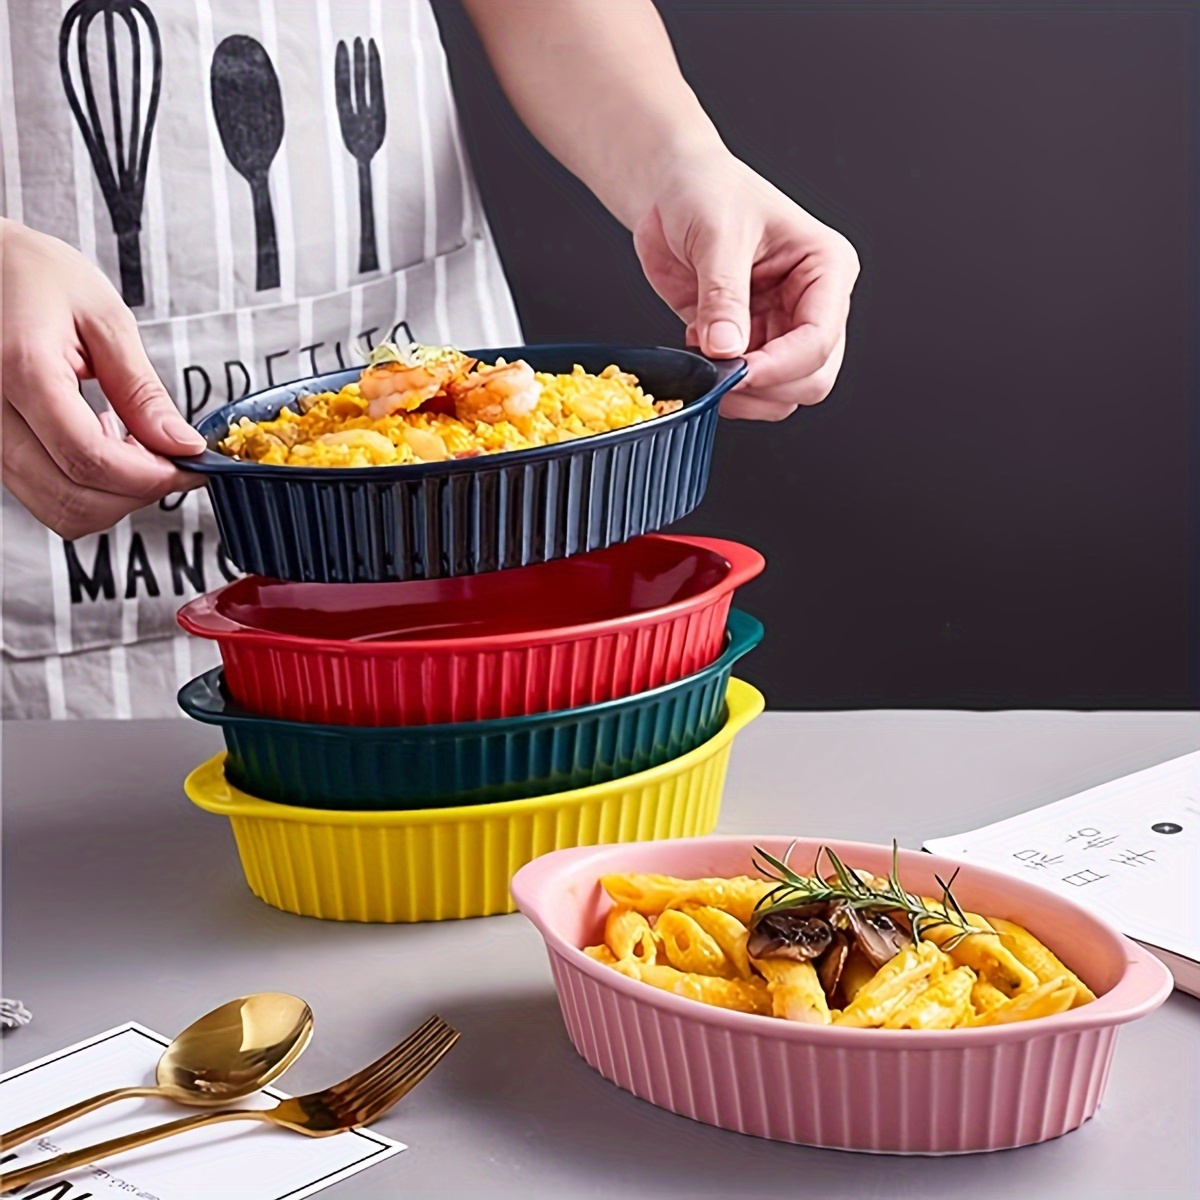 Small oven dishes Casserole dish Porcelain baking dish Ceramic grill bowl  Oven dish Plates Colorful soup plates, roasting pan Baking tray with